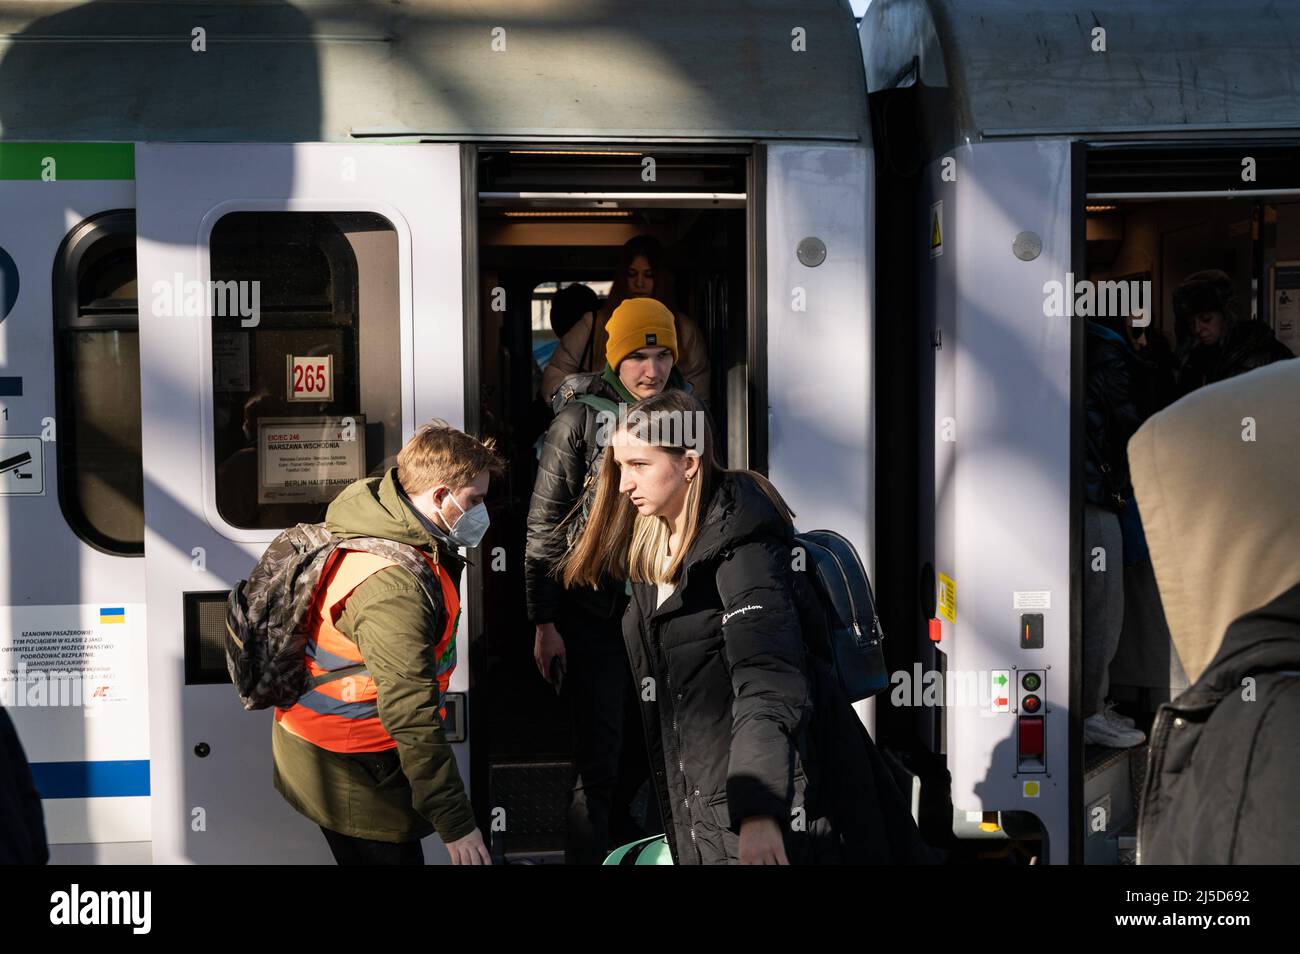 March 10, 2022, Berlin, Germany, Europe - War refugees from Ukraine disembark from a train from Warsaw as they arrive at Berlin's main train station after fleeing war from their homeland. [automated translation] Stock Photo